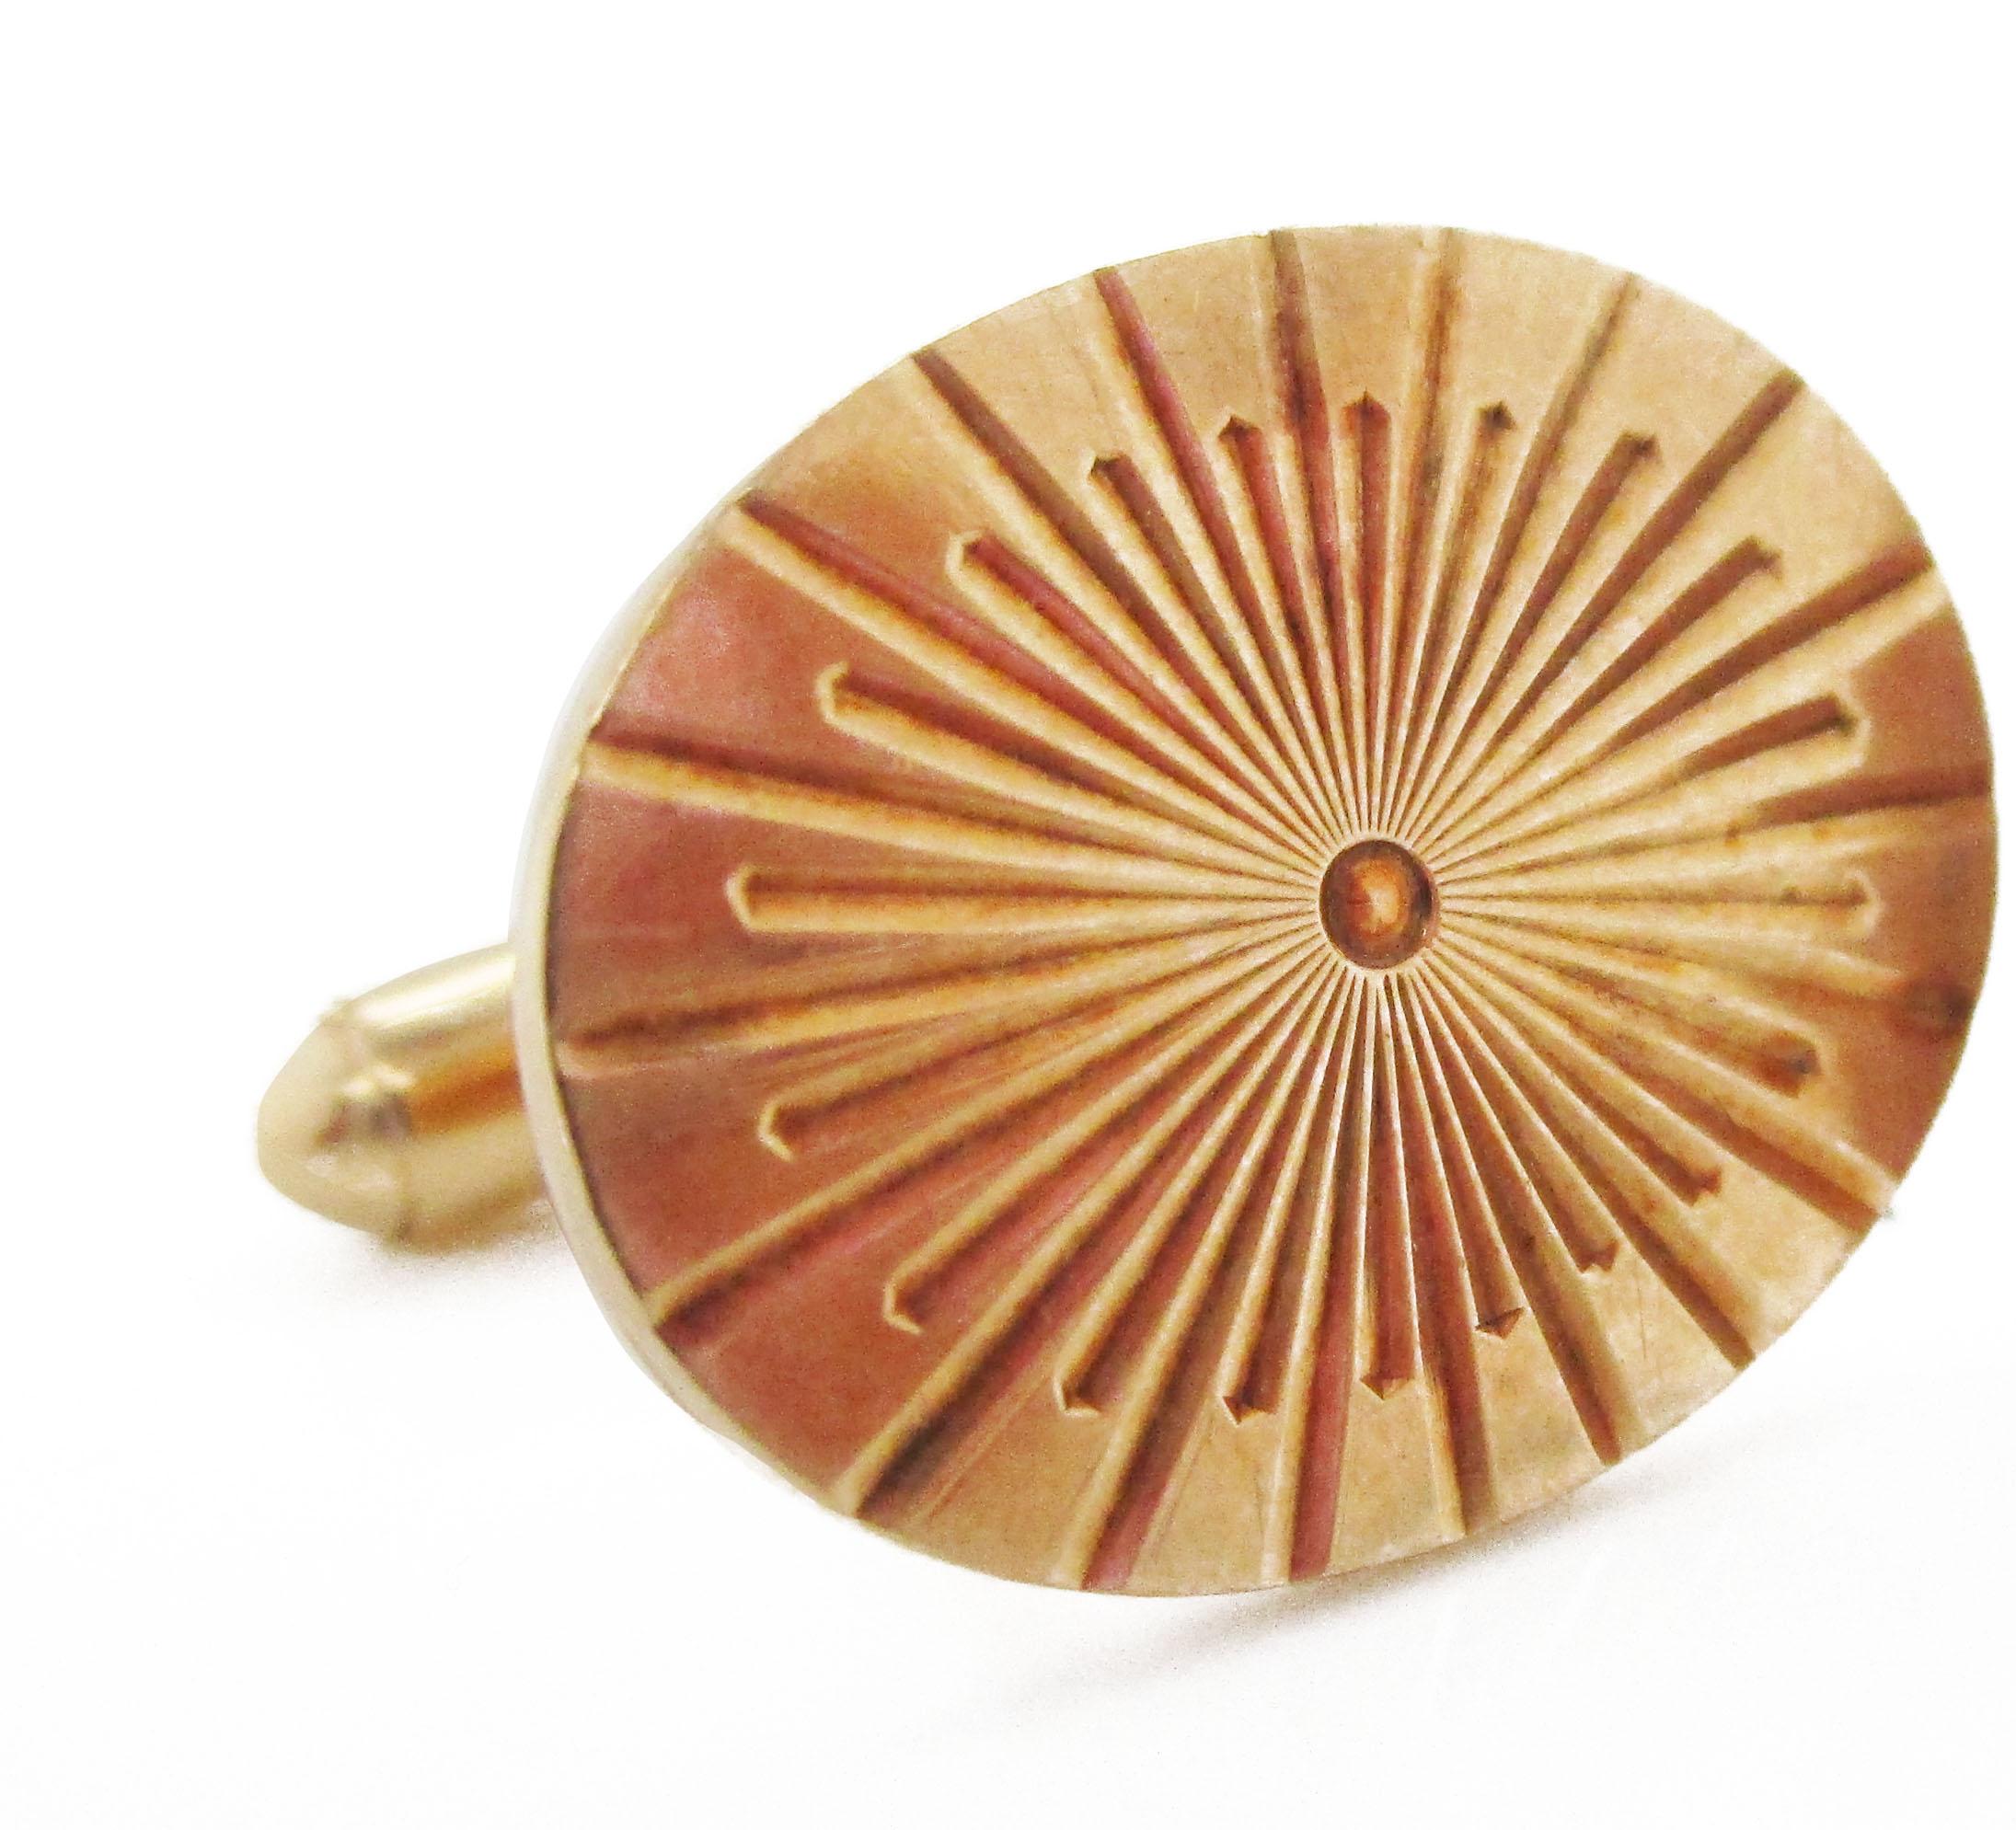 These dramatic mid-century cufflinks are from the 1950s and bear a fantastic sunburst pattern in 10k gold. The links are solid gold, giving them a stunning look that would stand apart from every other pair of cufflinks! The panels are a wonderful